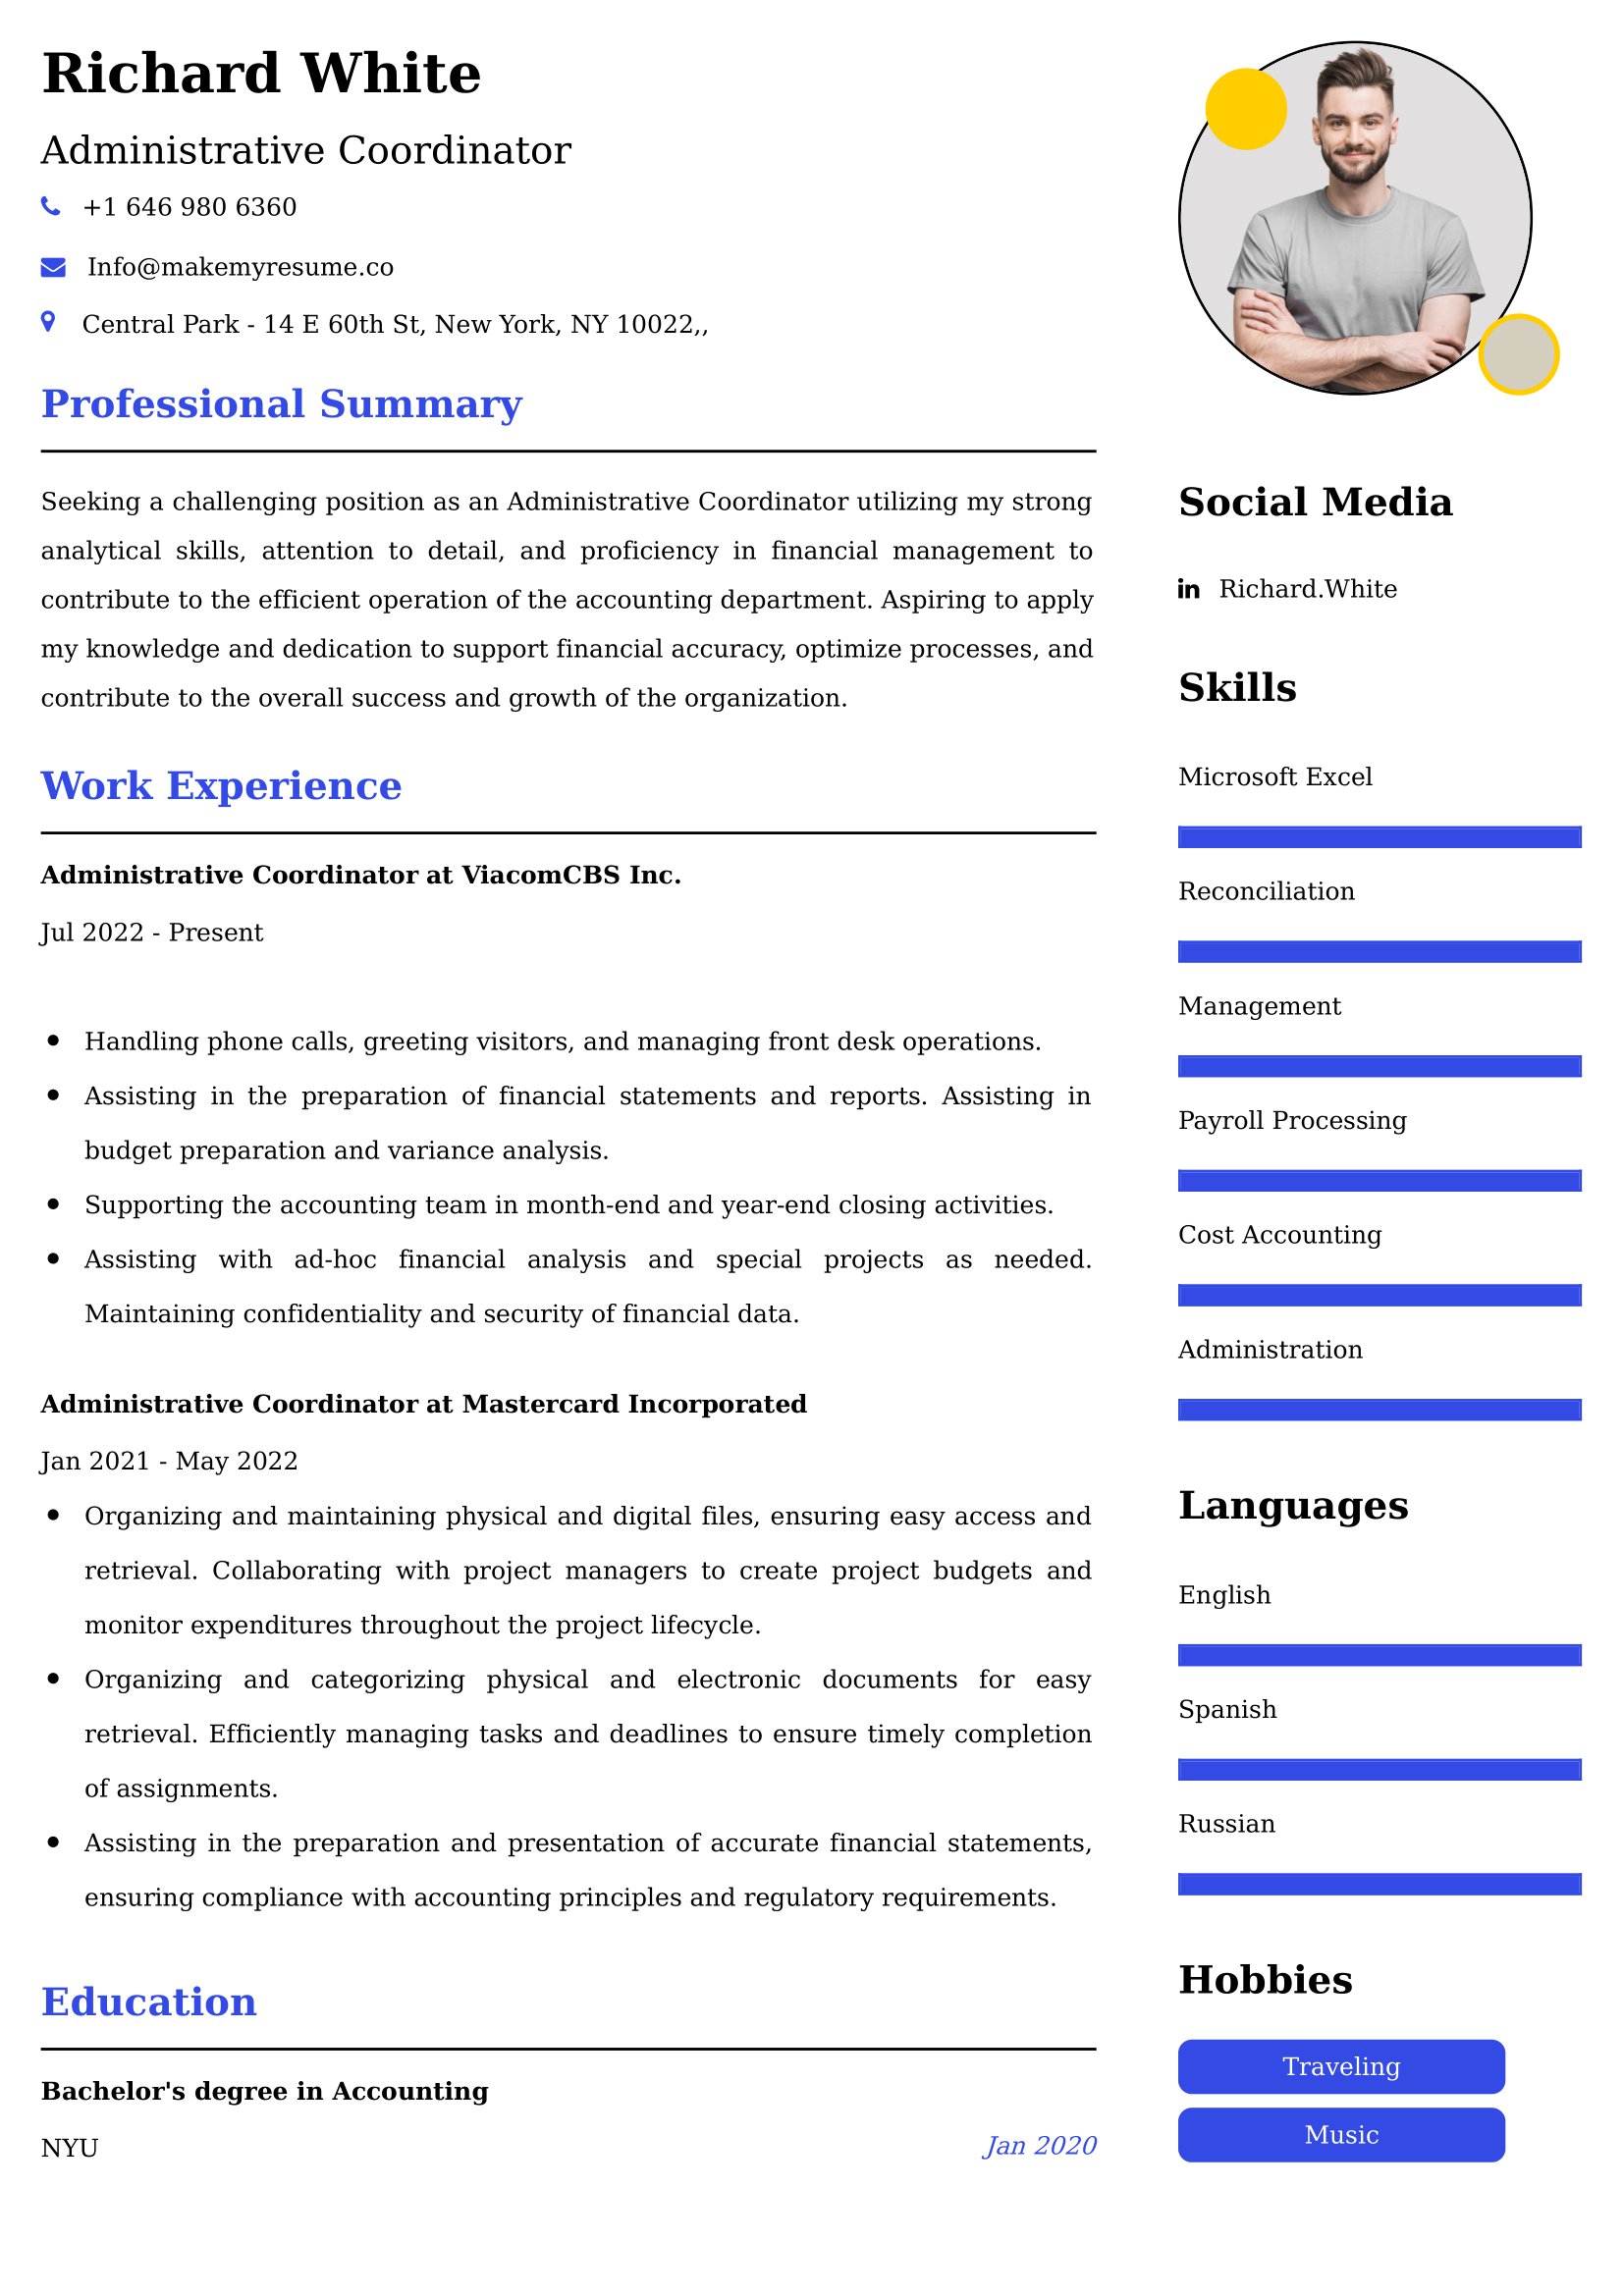 Administrative Coordinator Resume Examples - Australian Format and Tips